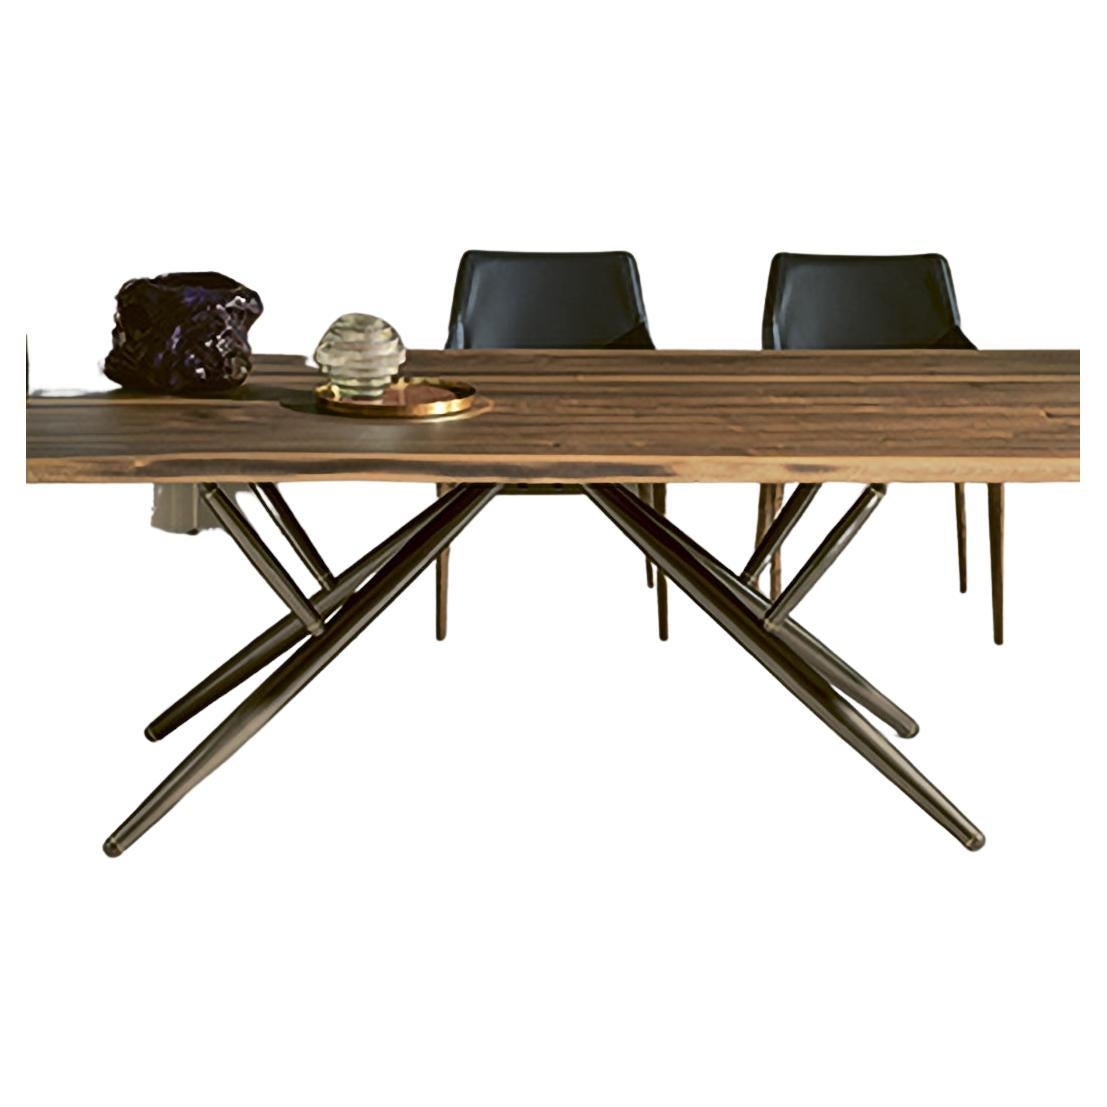 Modern Italian Metal and Solid Wood Table from Bontempi Casa Collection For Sale